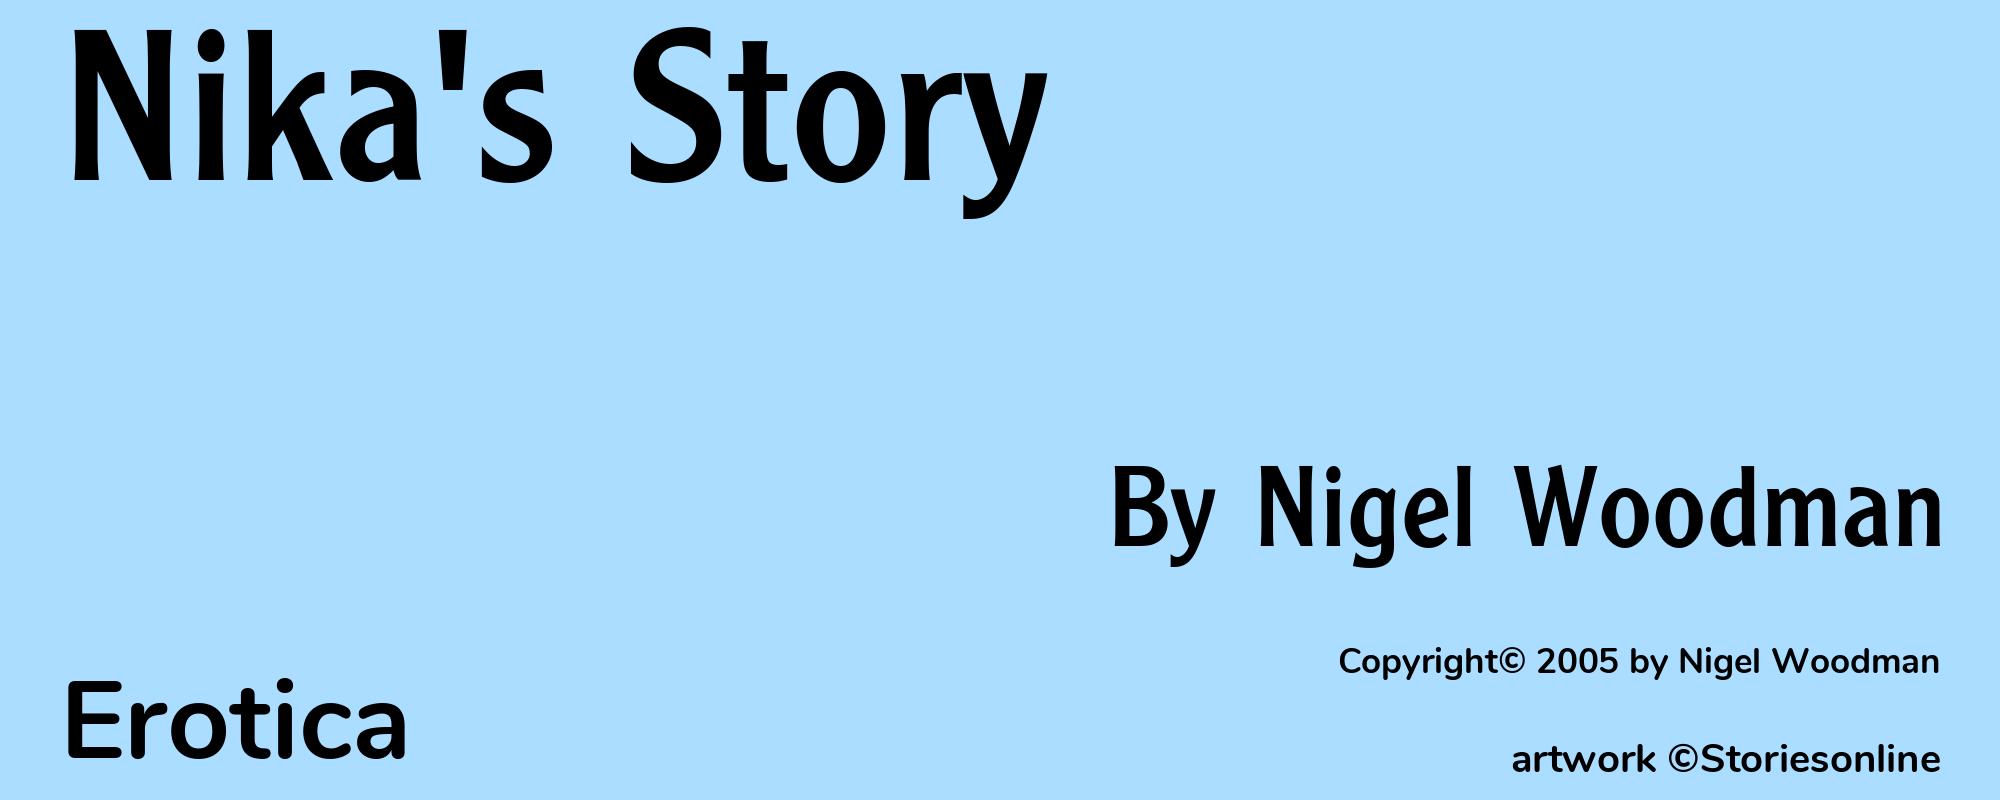 Nika's Story - Cover